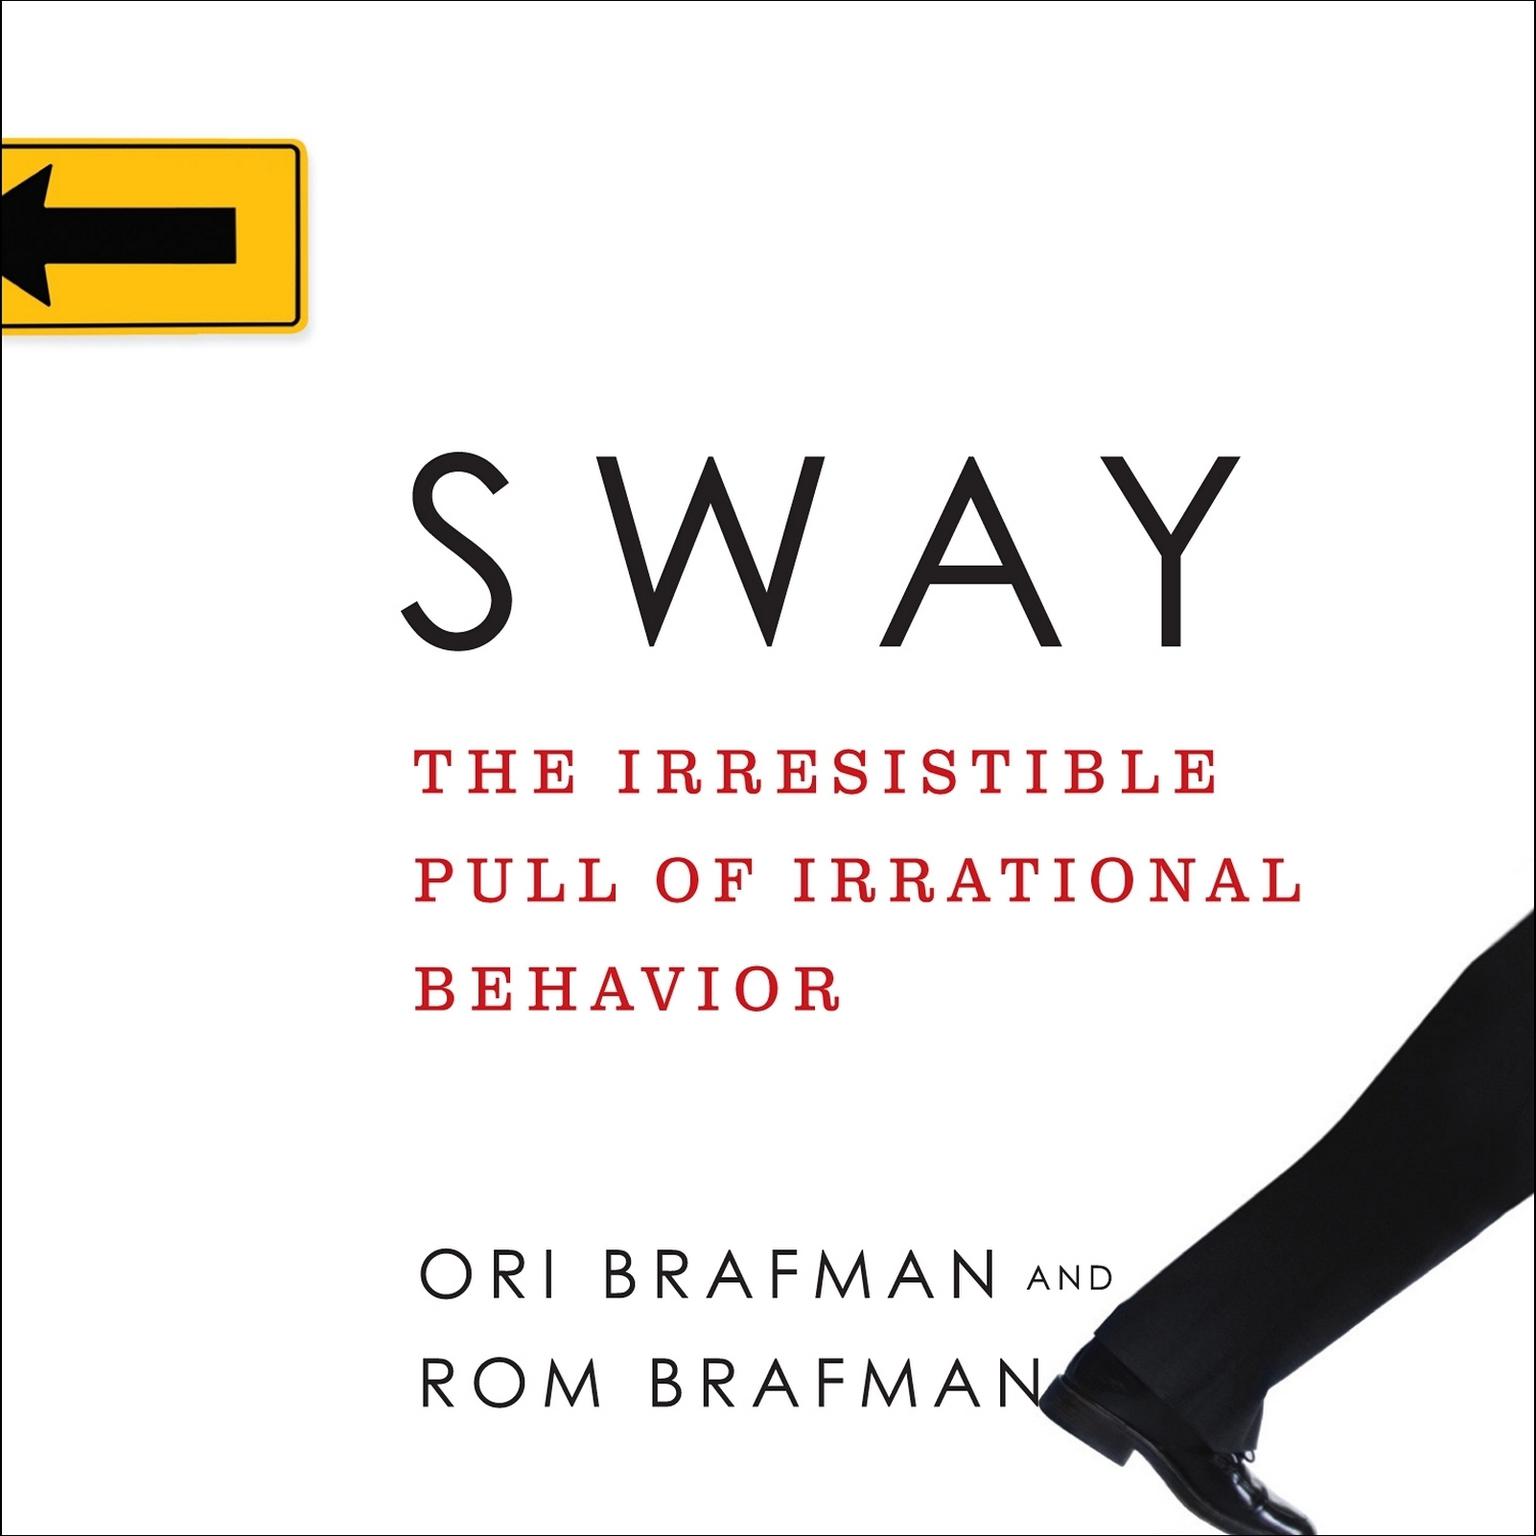 Sway: The Irresistible Pull of Irrational Behavior Audiobook, by Ori Brafman